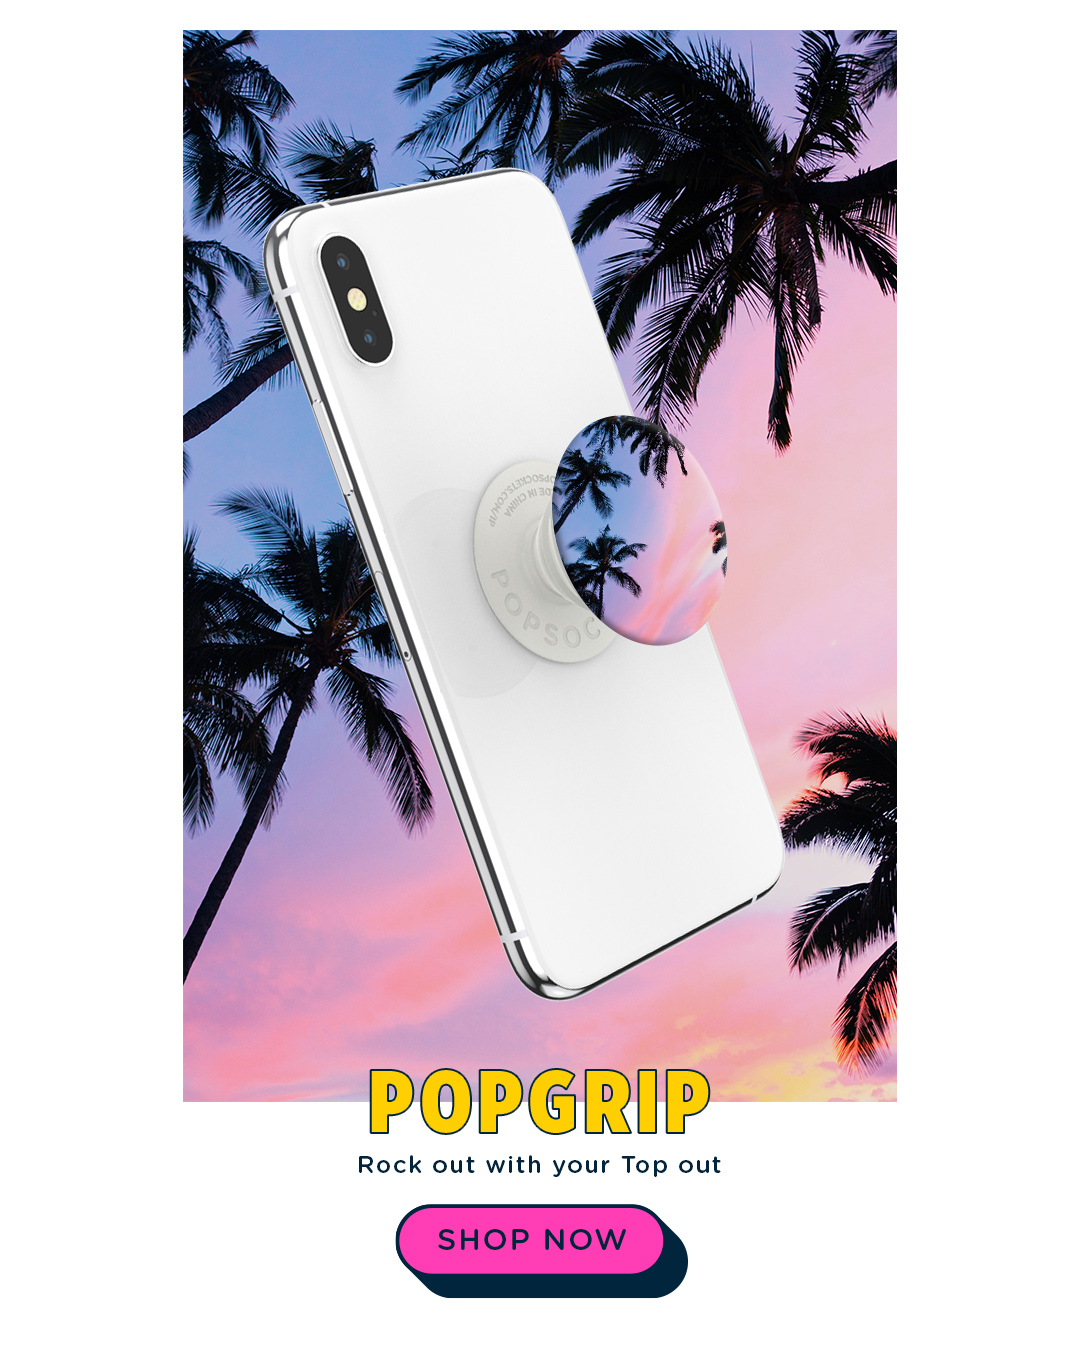 Create Your Own PopGrip